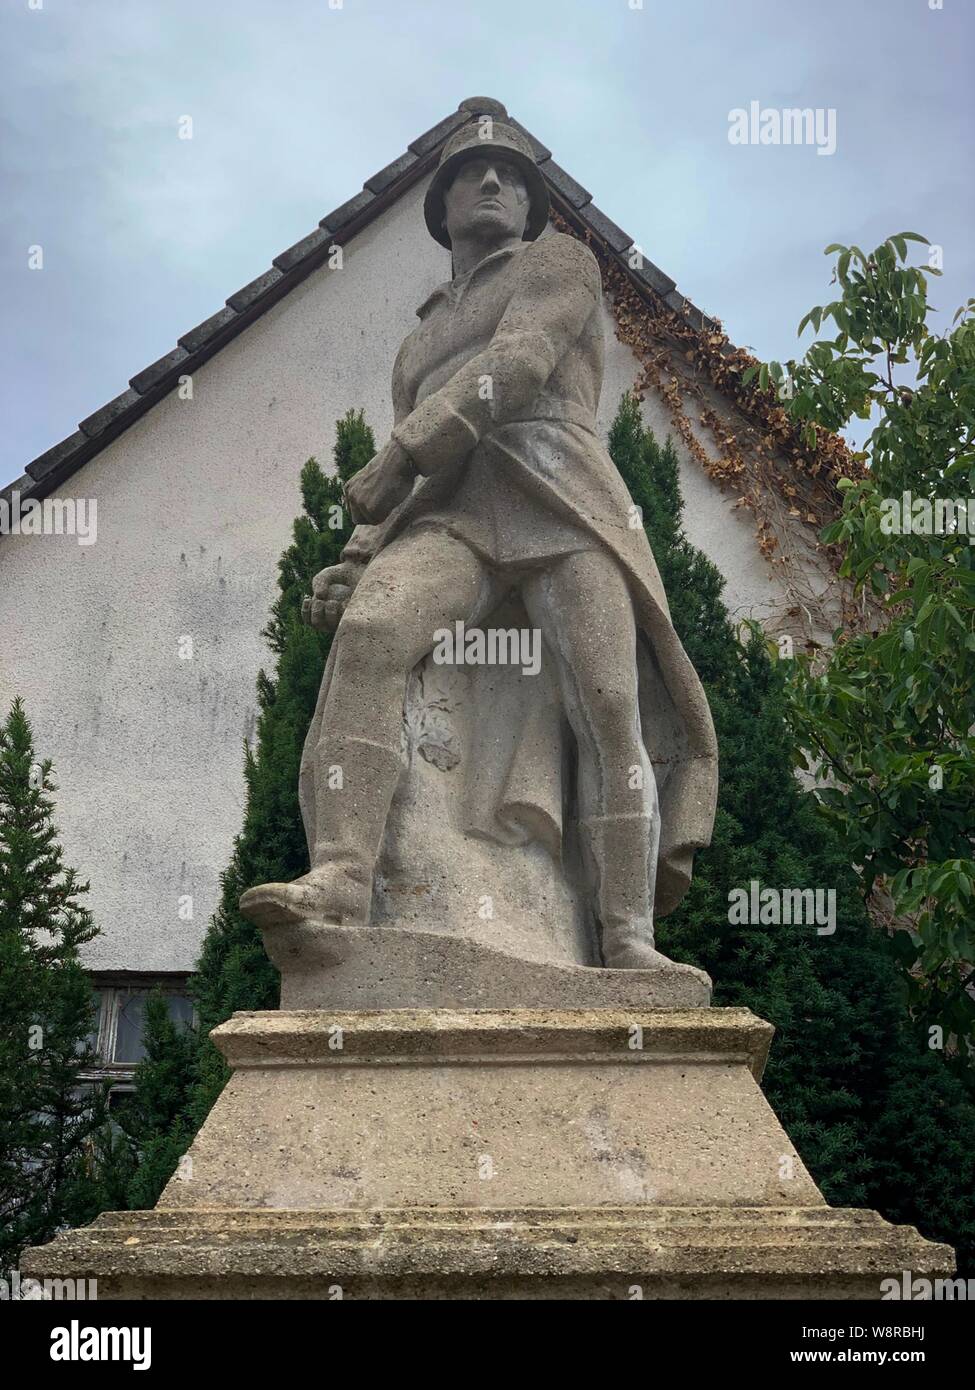 Moehrendorf, Germany - August 9, 2019: View of a war memorial in Moehrendorf commemorating the soldiers who died in the First and Second World Wars. Stock Photo